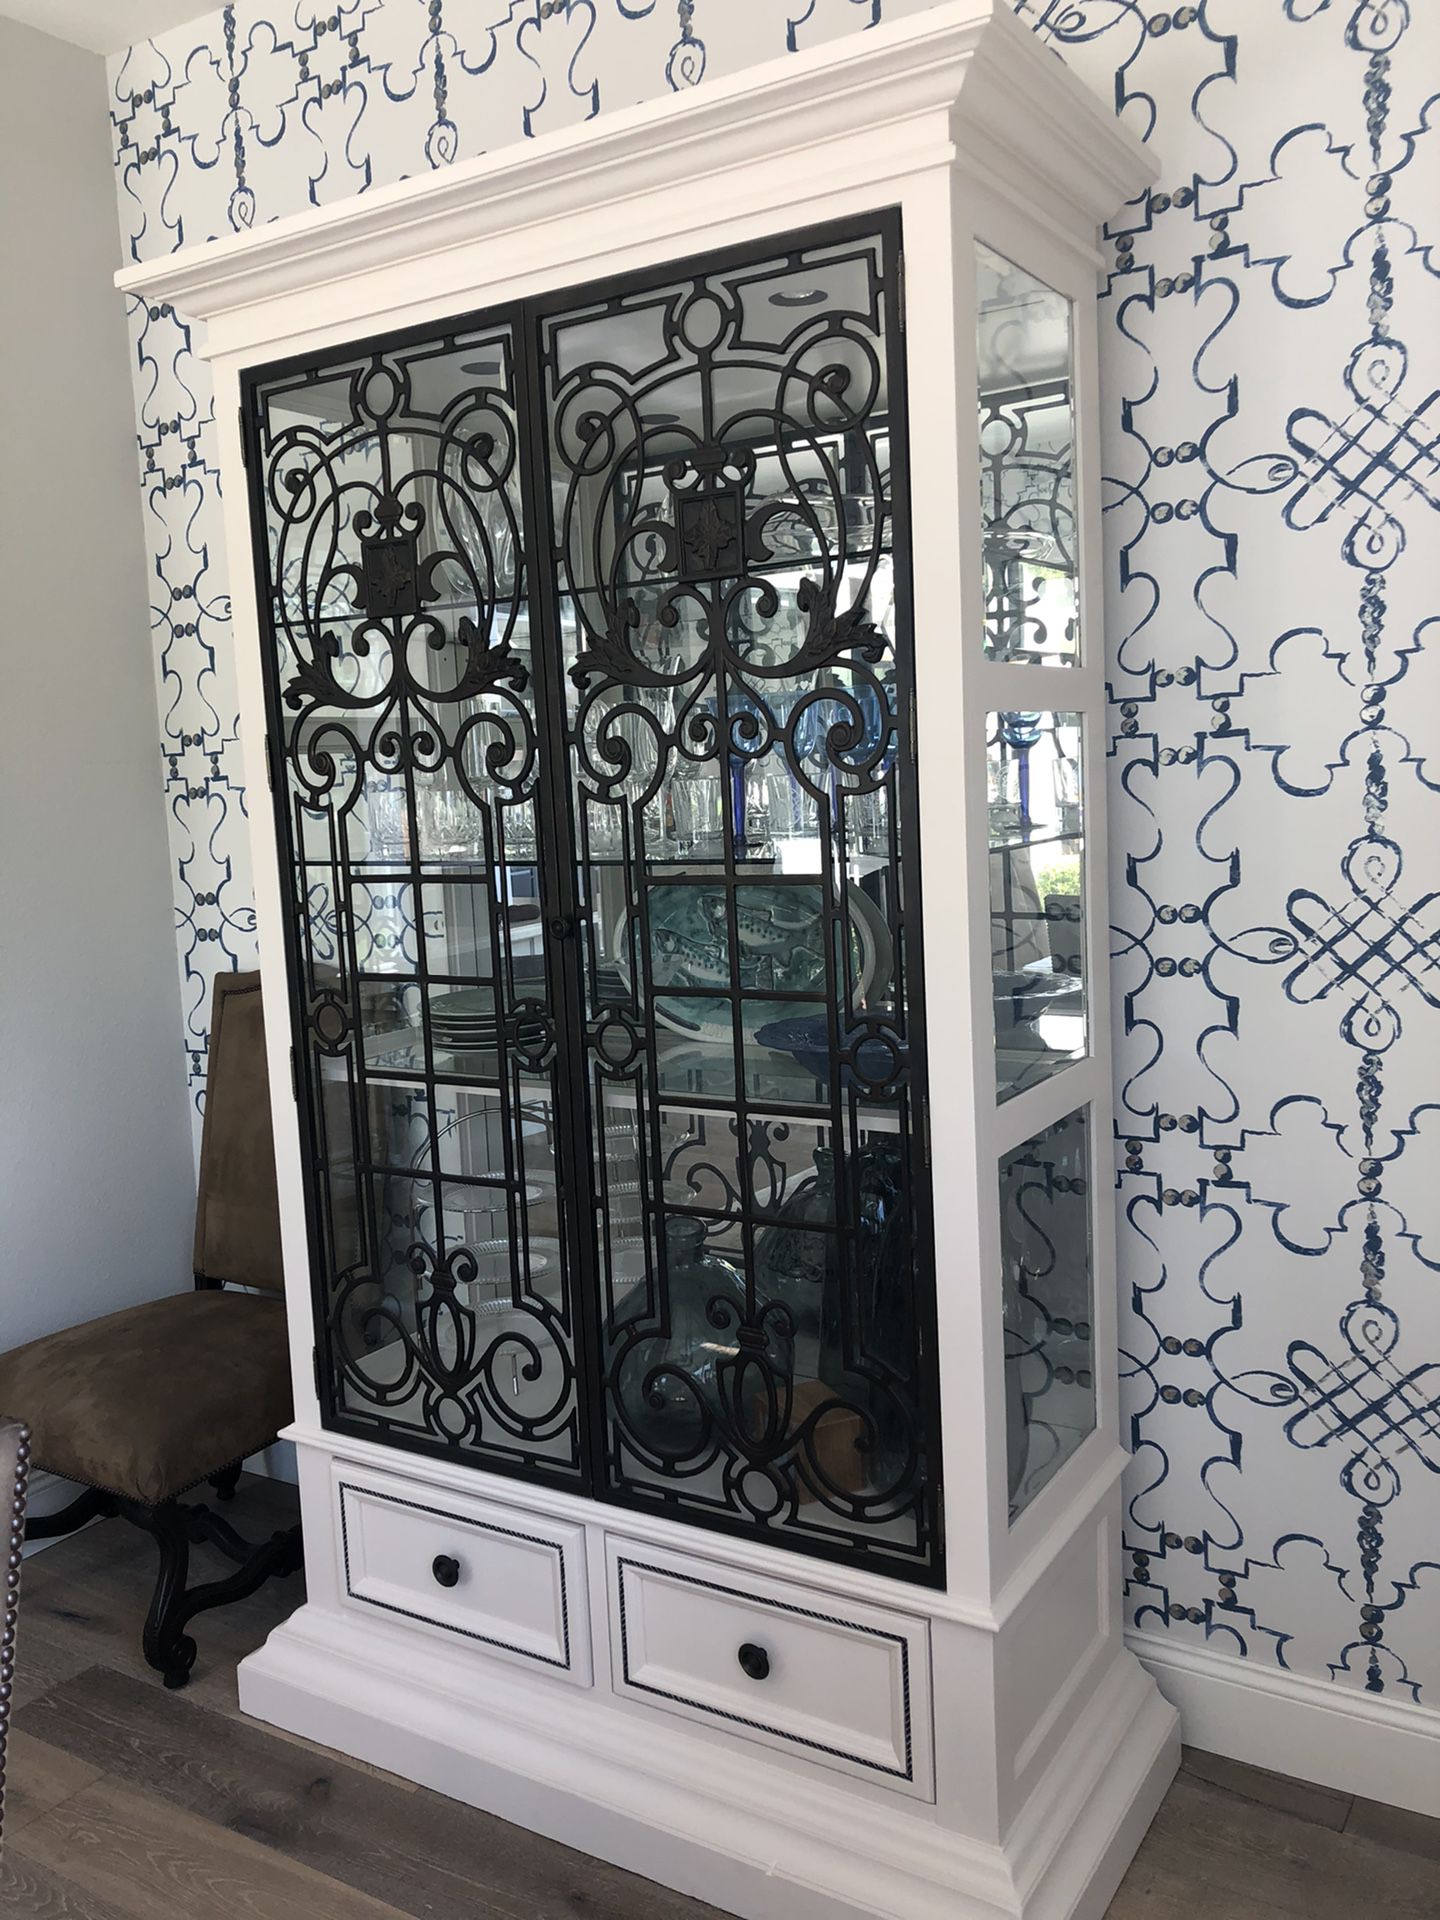 High end china cabinet with lights, mirrored back, drawers and plate grooves.